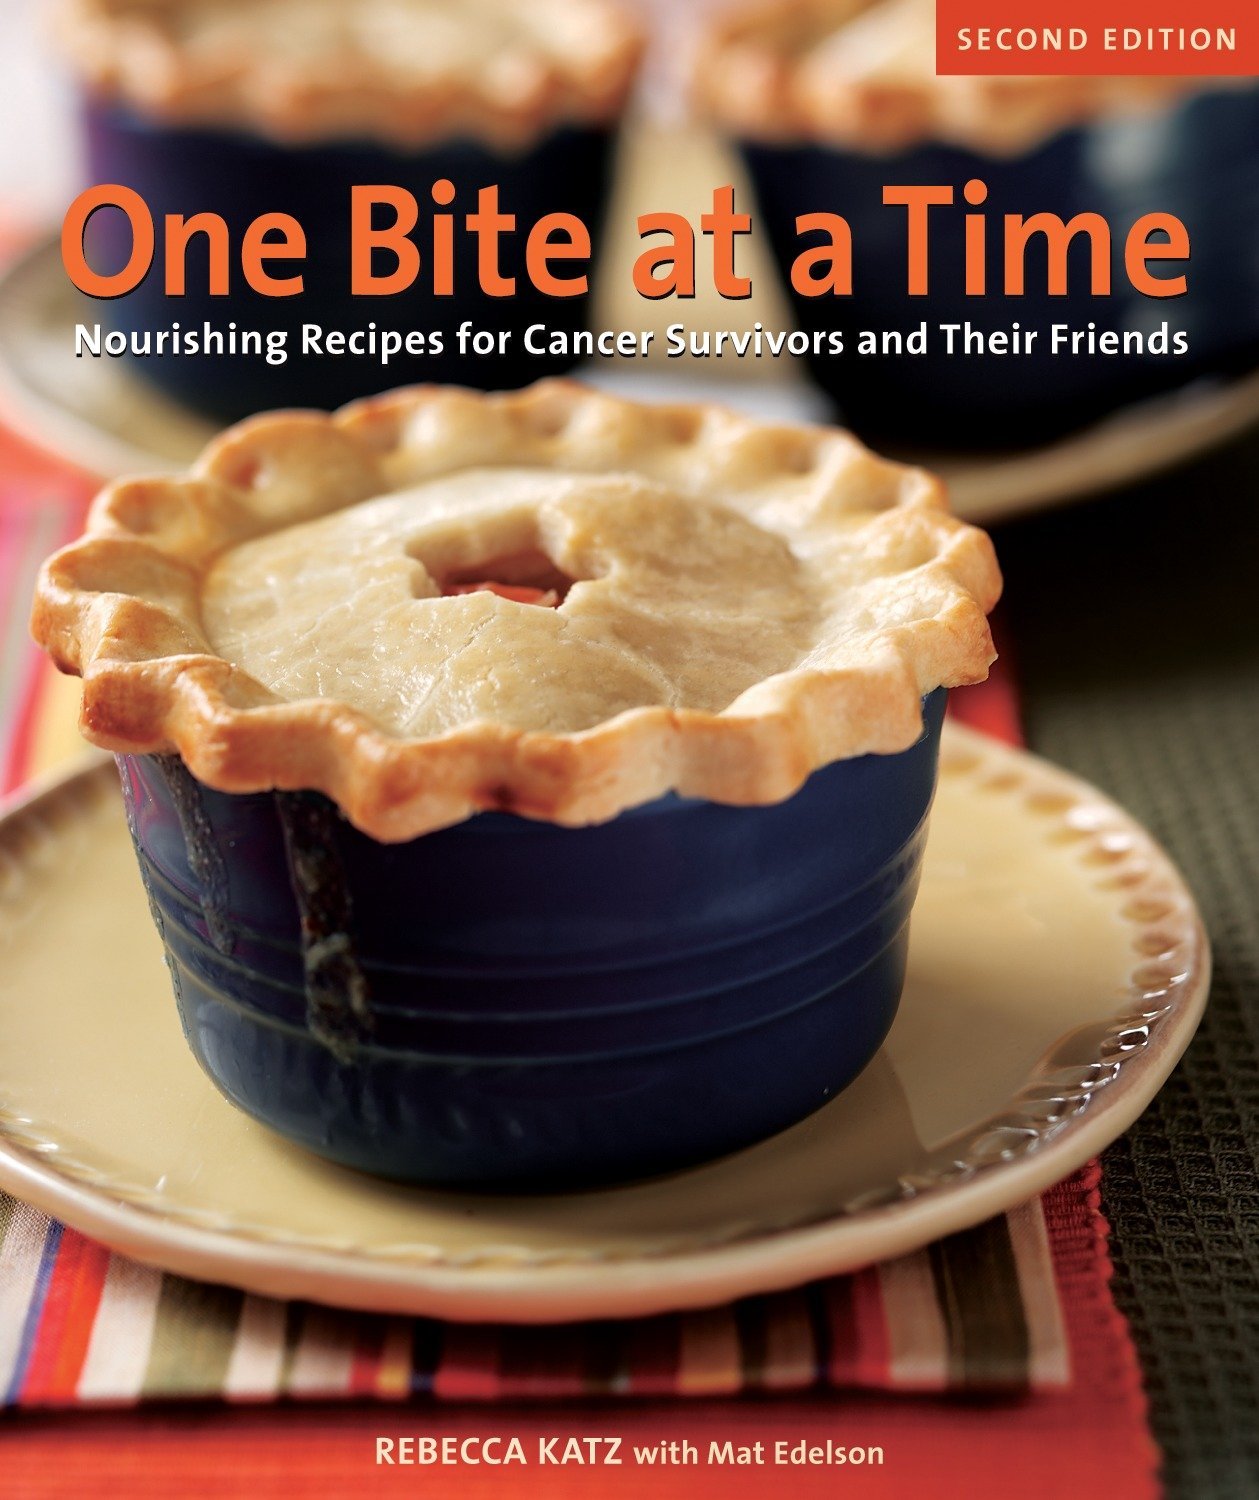 One Bite at a Time: Nourishing Recipes for Cancer Survivors and Their Friends (Rebecca Katz)